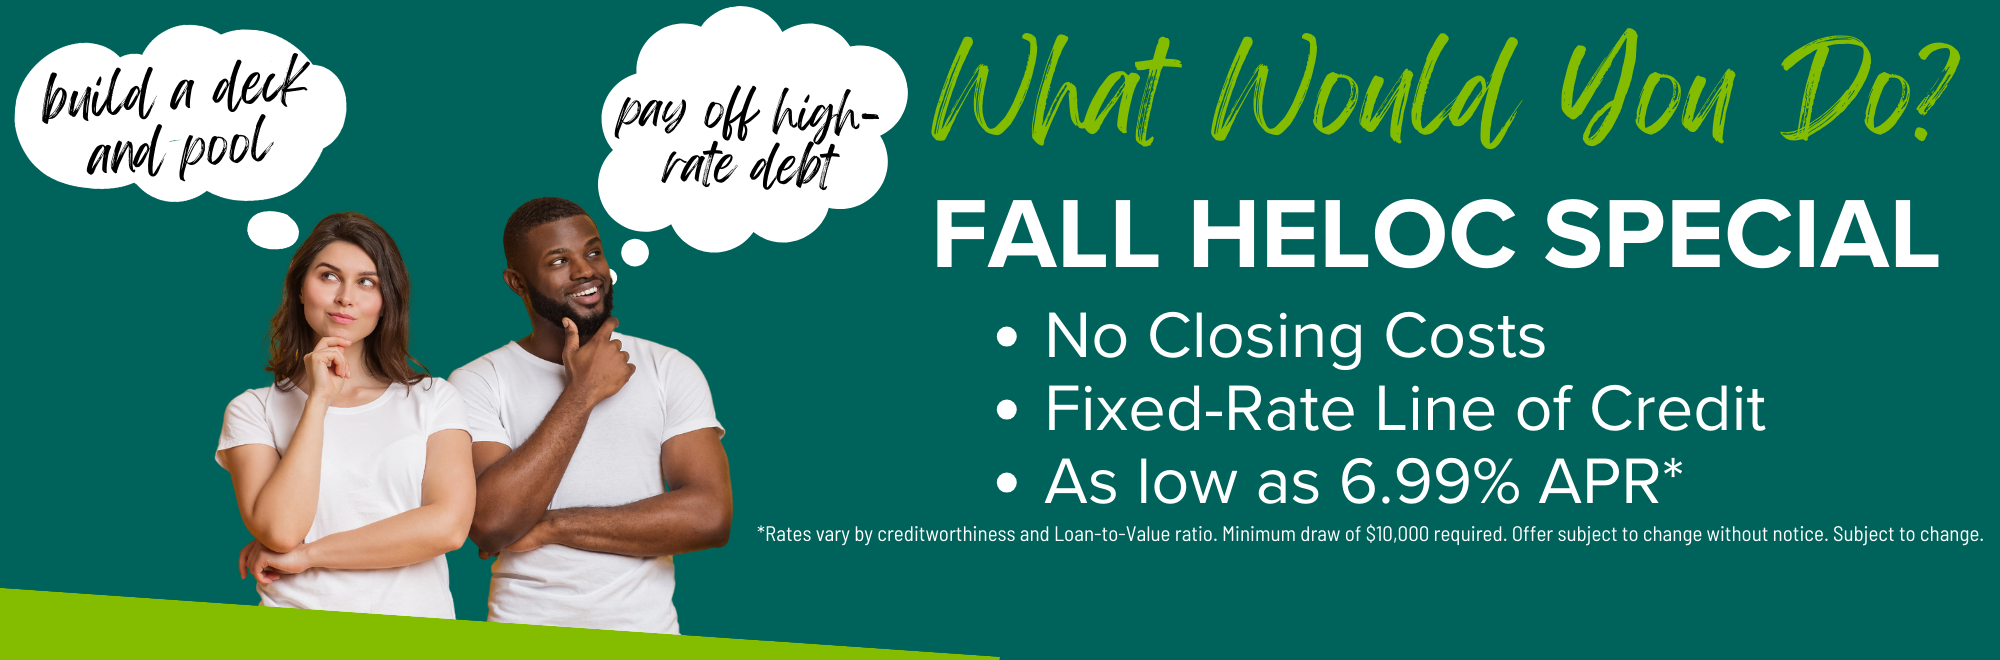 Learn about our fixed rate HELOC special as low as 6.99% APR. Minimum draw of $10000. Offer subject to change without notice.